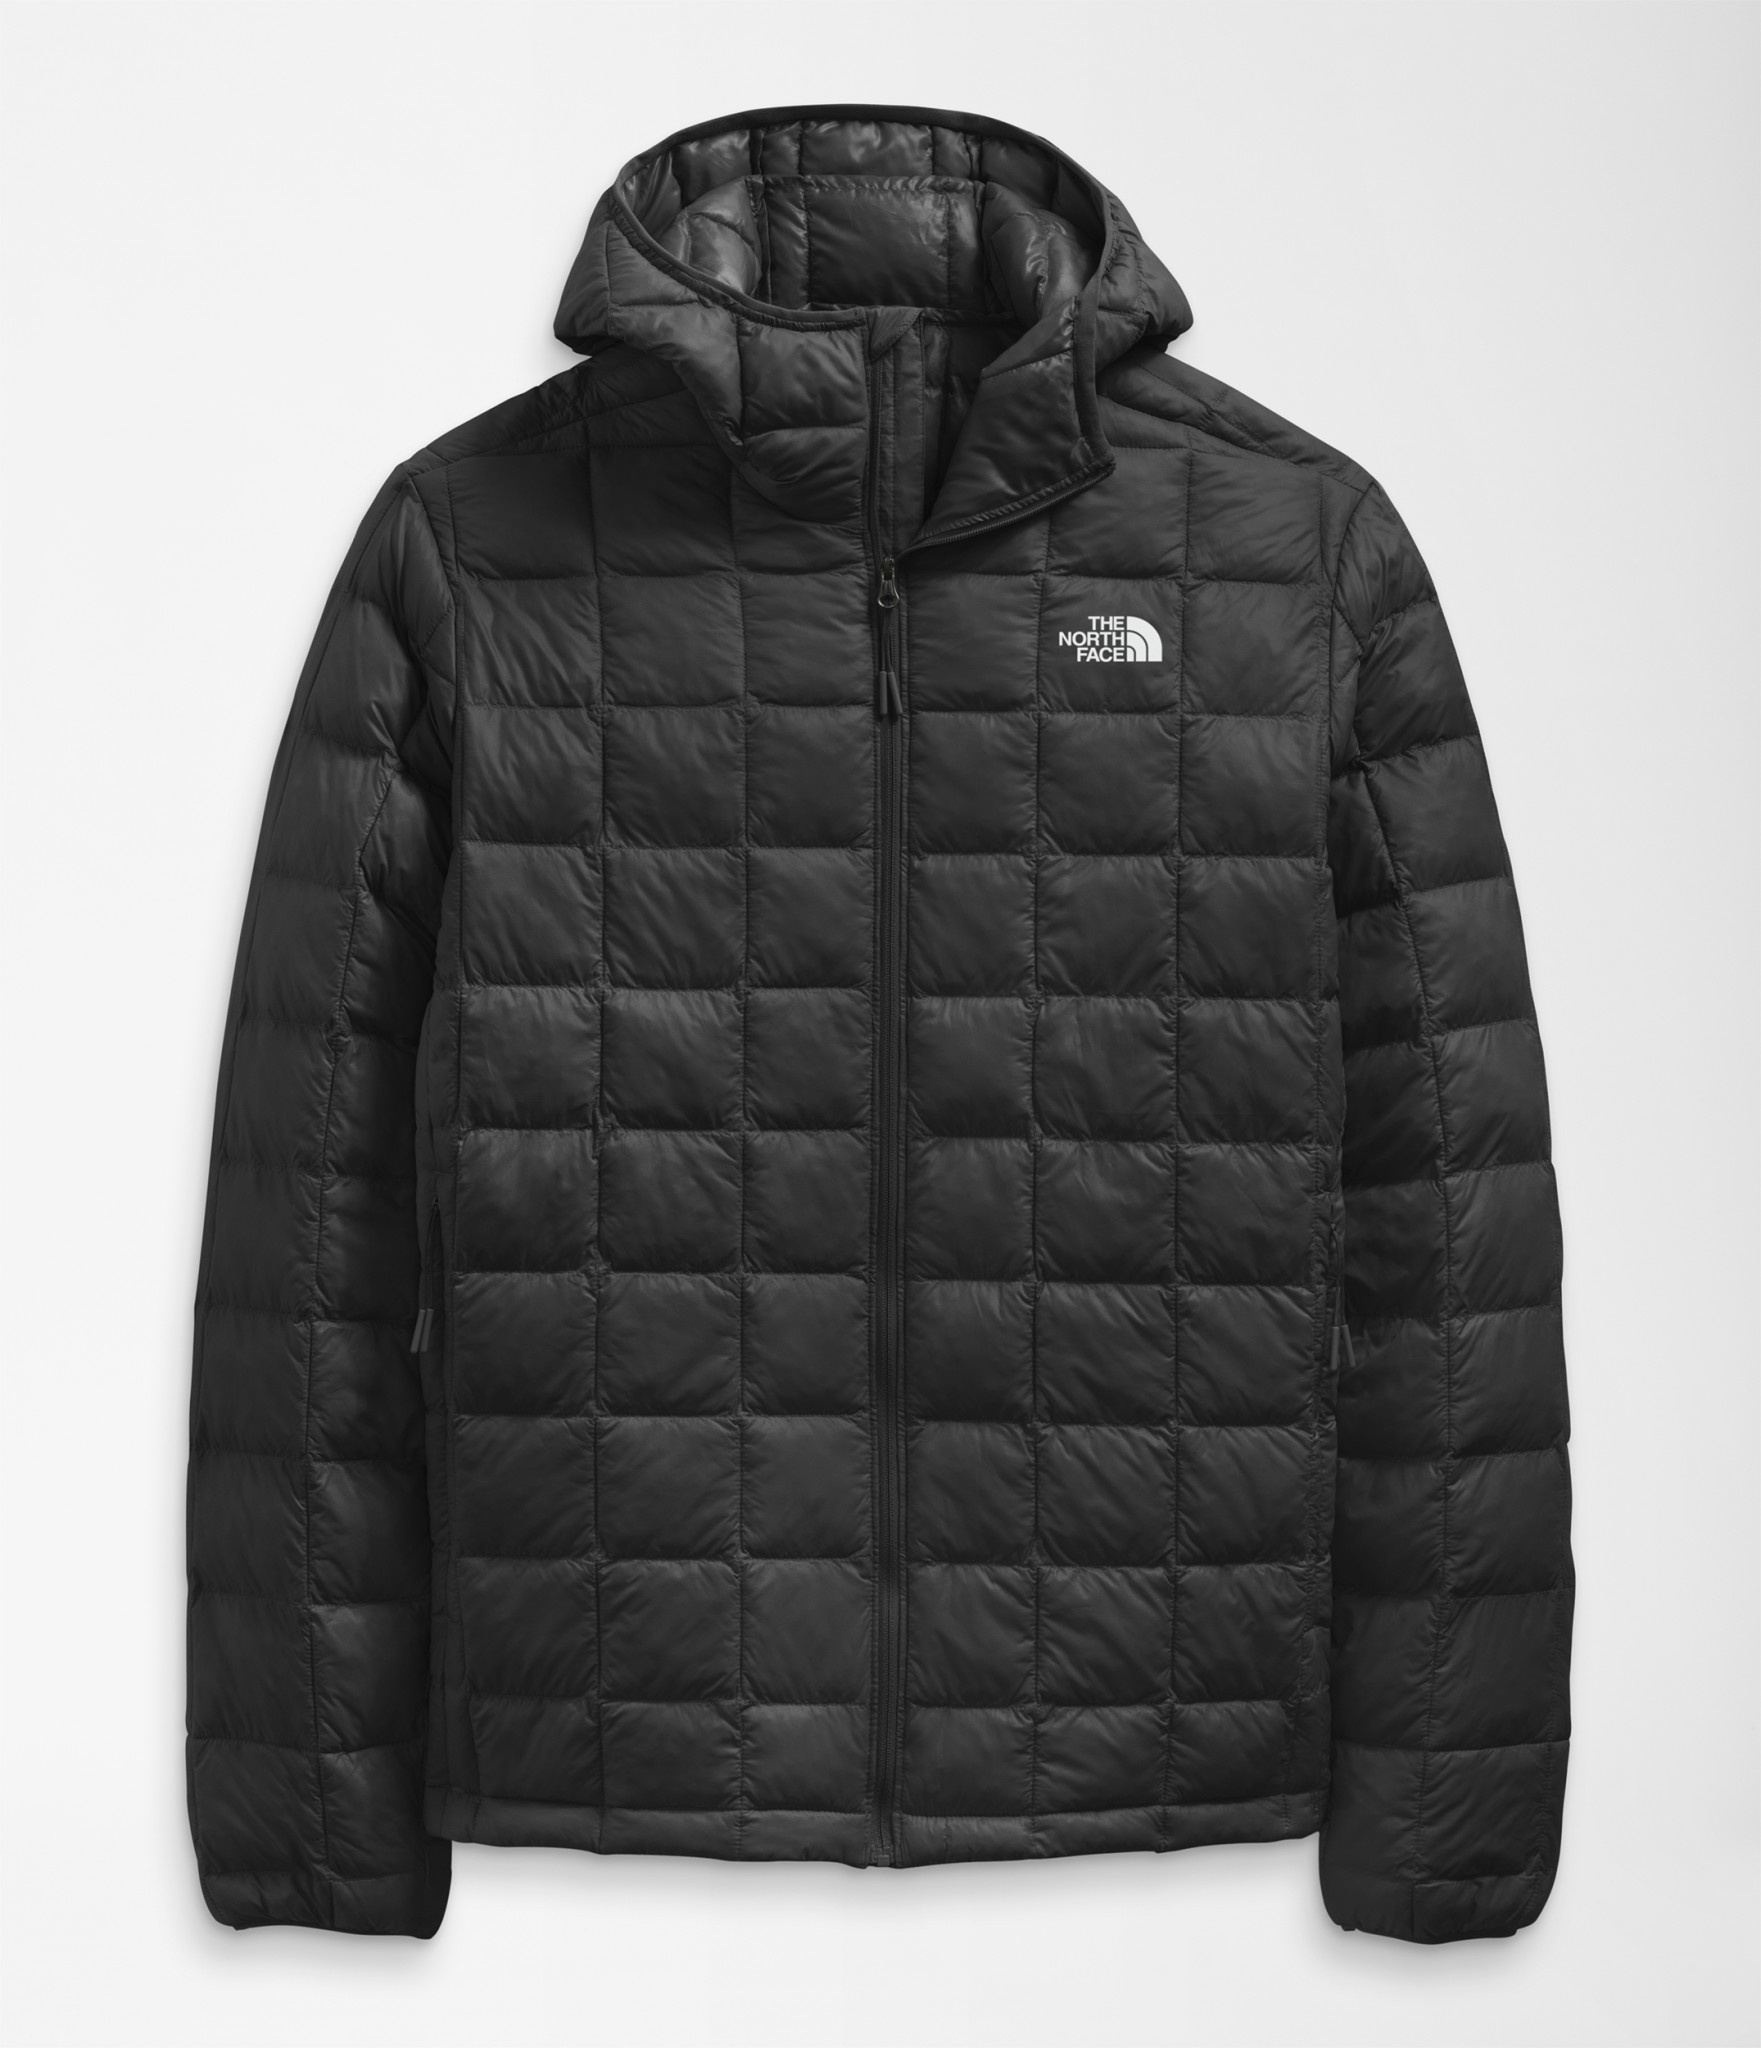 The North Face The North Face M's Thermoball Eco Hoodie